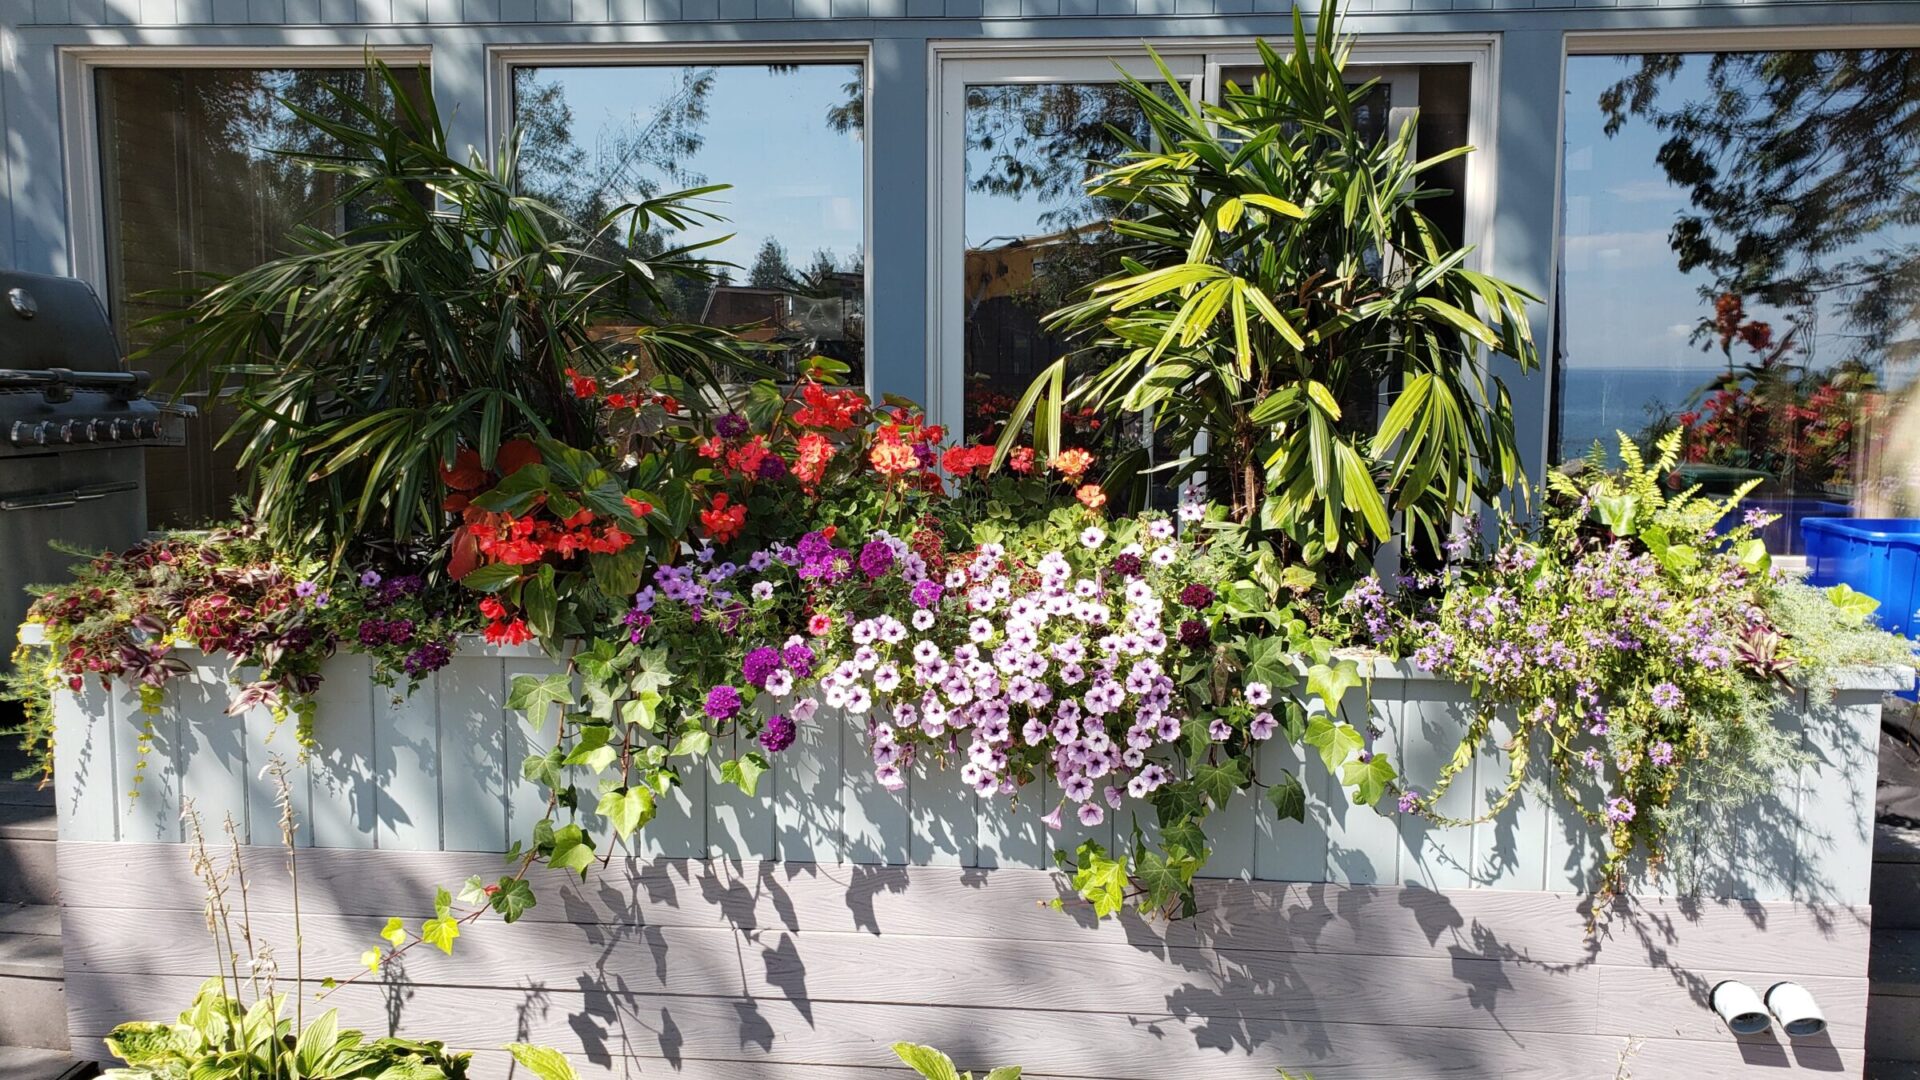 A vibrant display of assorted flowers in containers along a deck railing, with a barbecue grill on the side and a seaside view in the background.